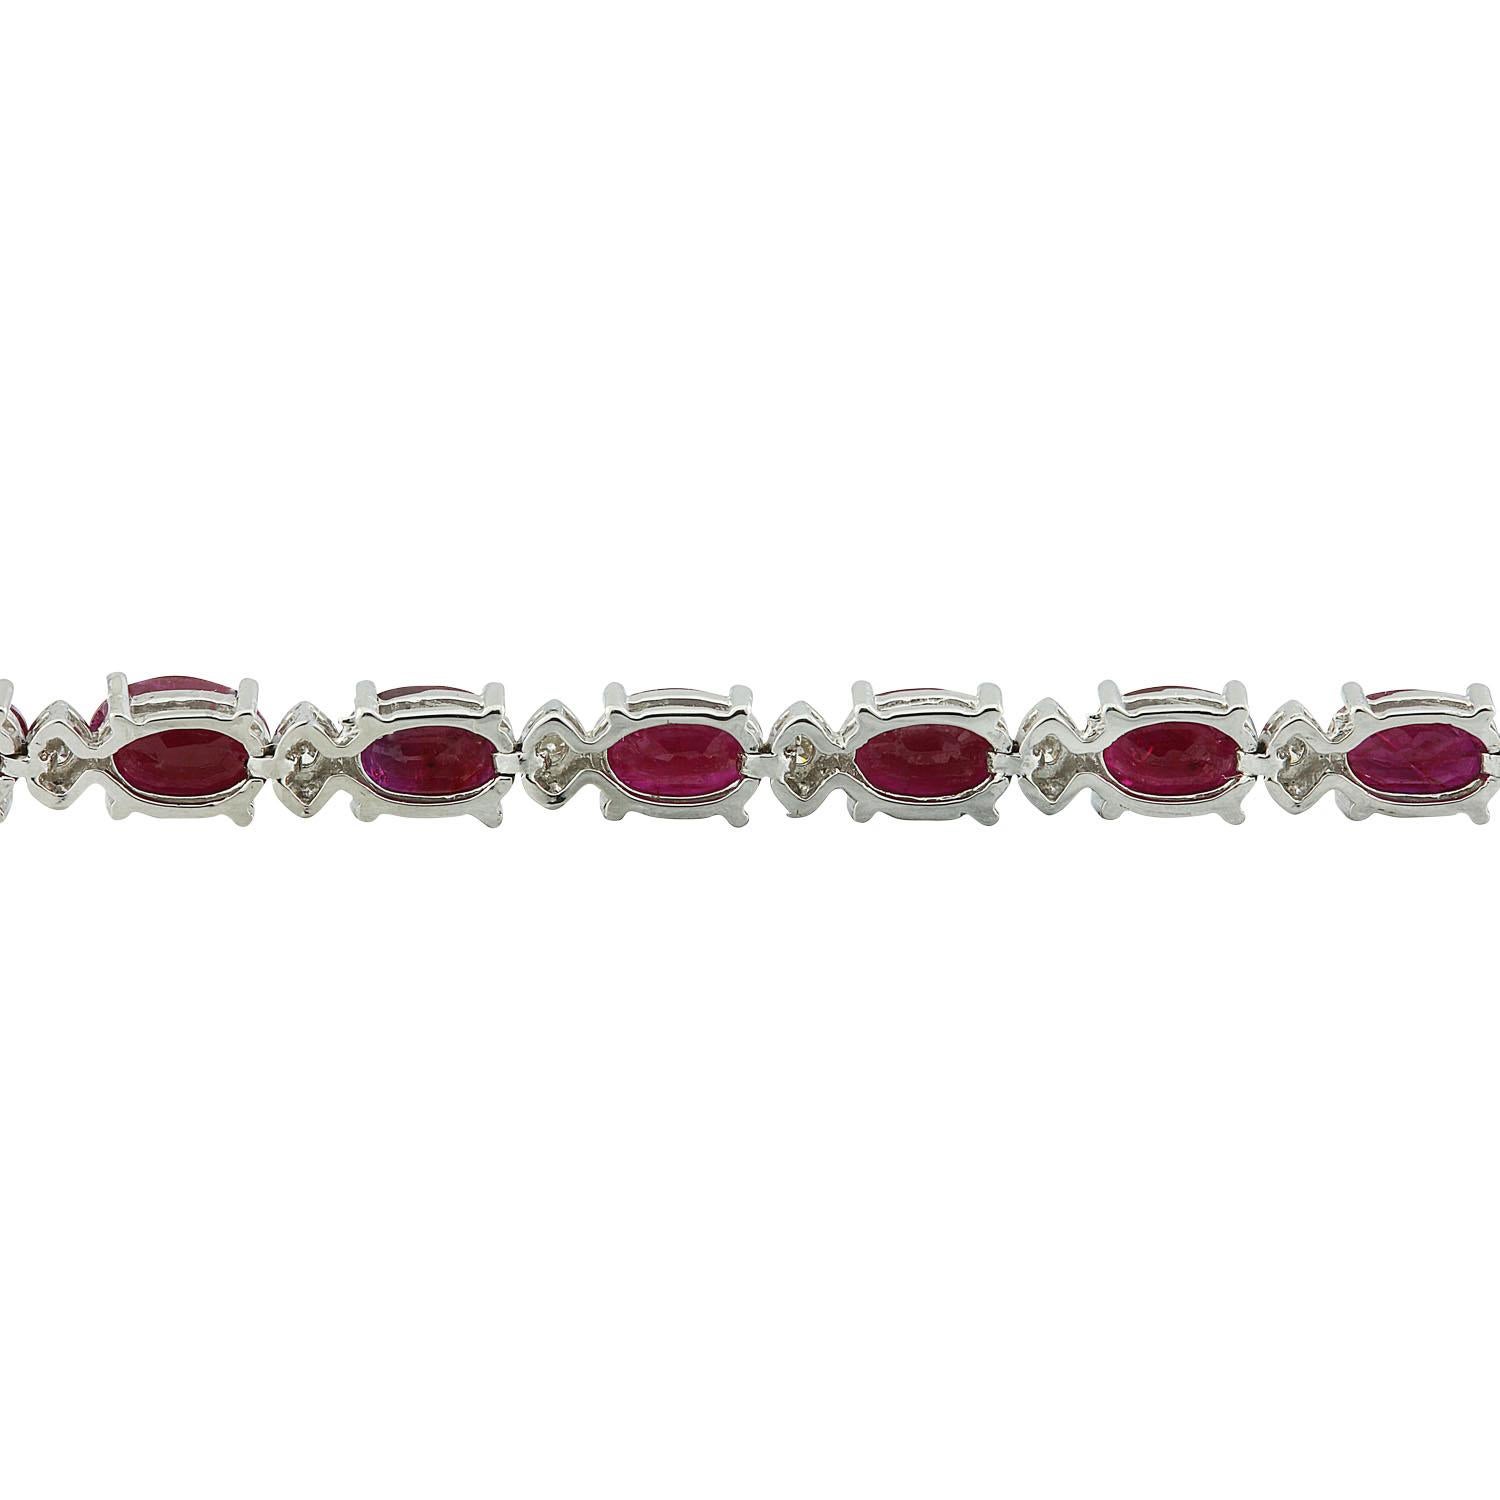 11.95 Carat Natural Ruby 14 Karat Solid White Gold Diamond Bracelet
Stamped: 14K
Total Bracelet Weight: 11.1 Grams
Bracelet Length: 7.0 Inches 
Ruby  Weight: 11.45 Carat (6.00x4.00 Millimeters) 
Diamond Weight: 0.50 Carat (F-G Color, VS2-SI1 Clarity